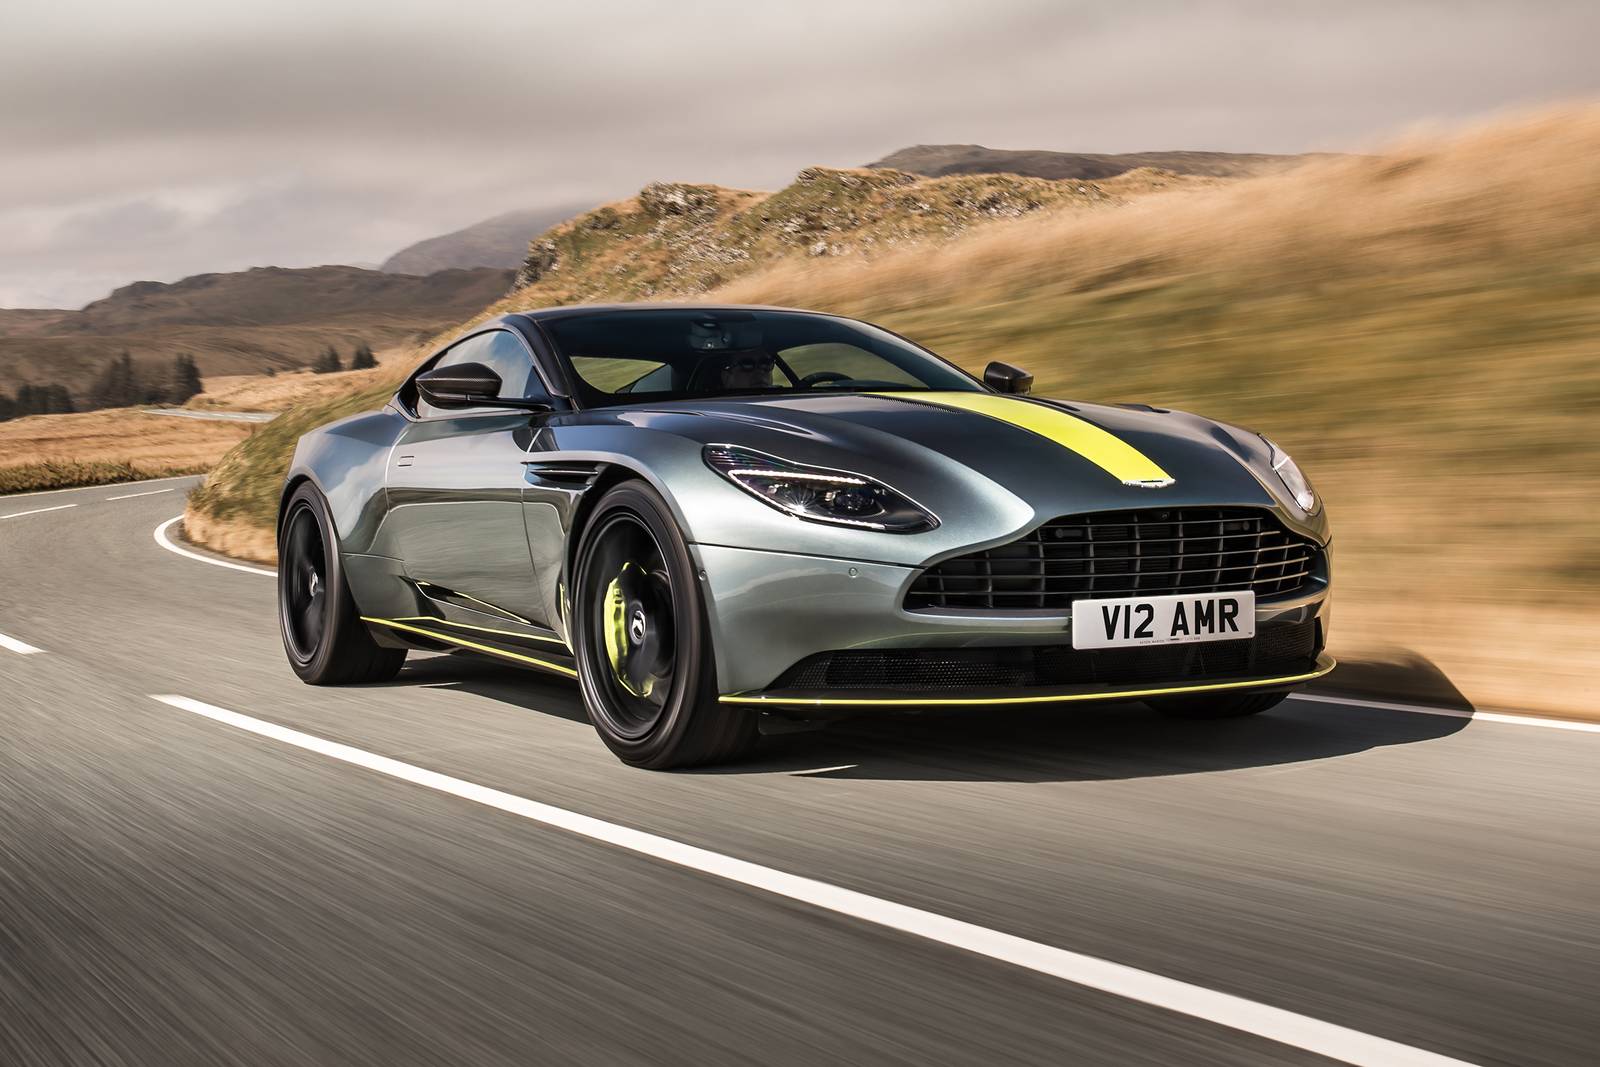 2021 Aston Martin Db11 Prices Reviews And Pictures How Much Is An Aston Martin Austin Martin Aston Martin Cost